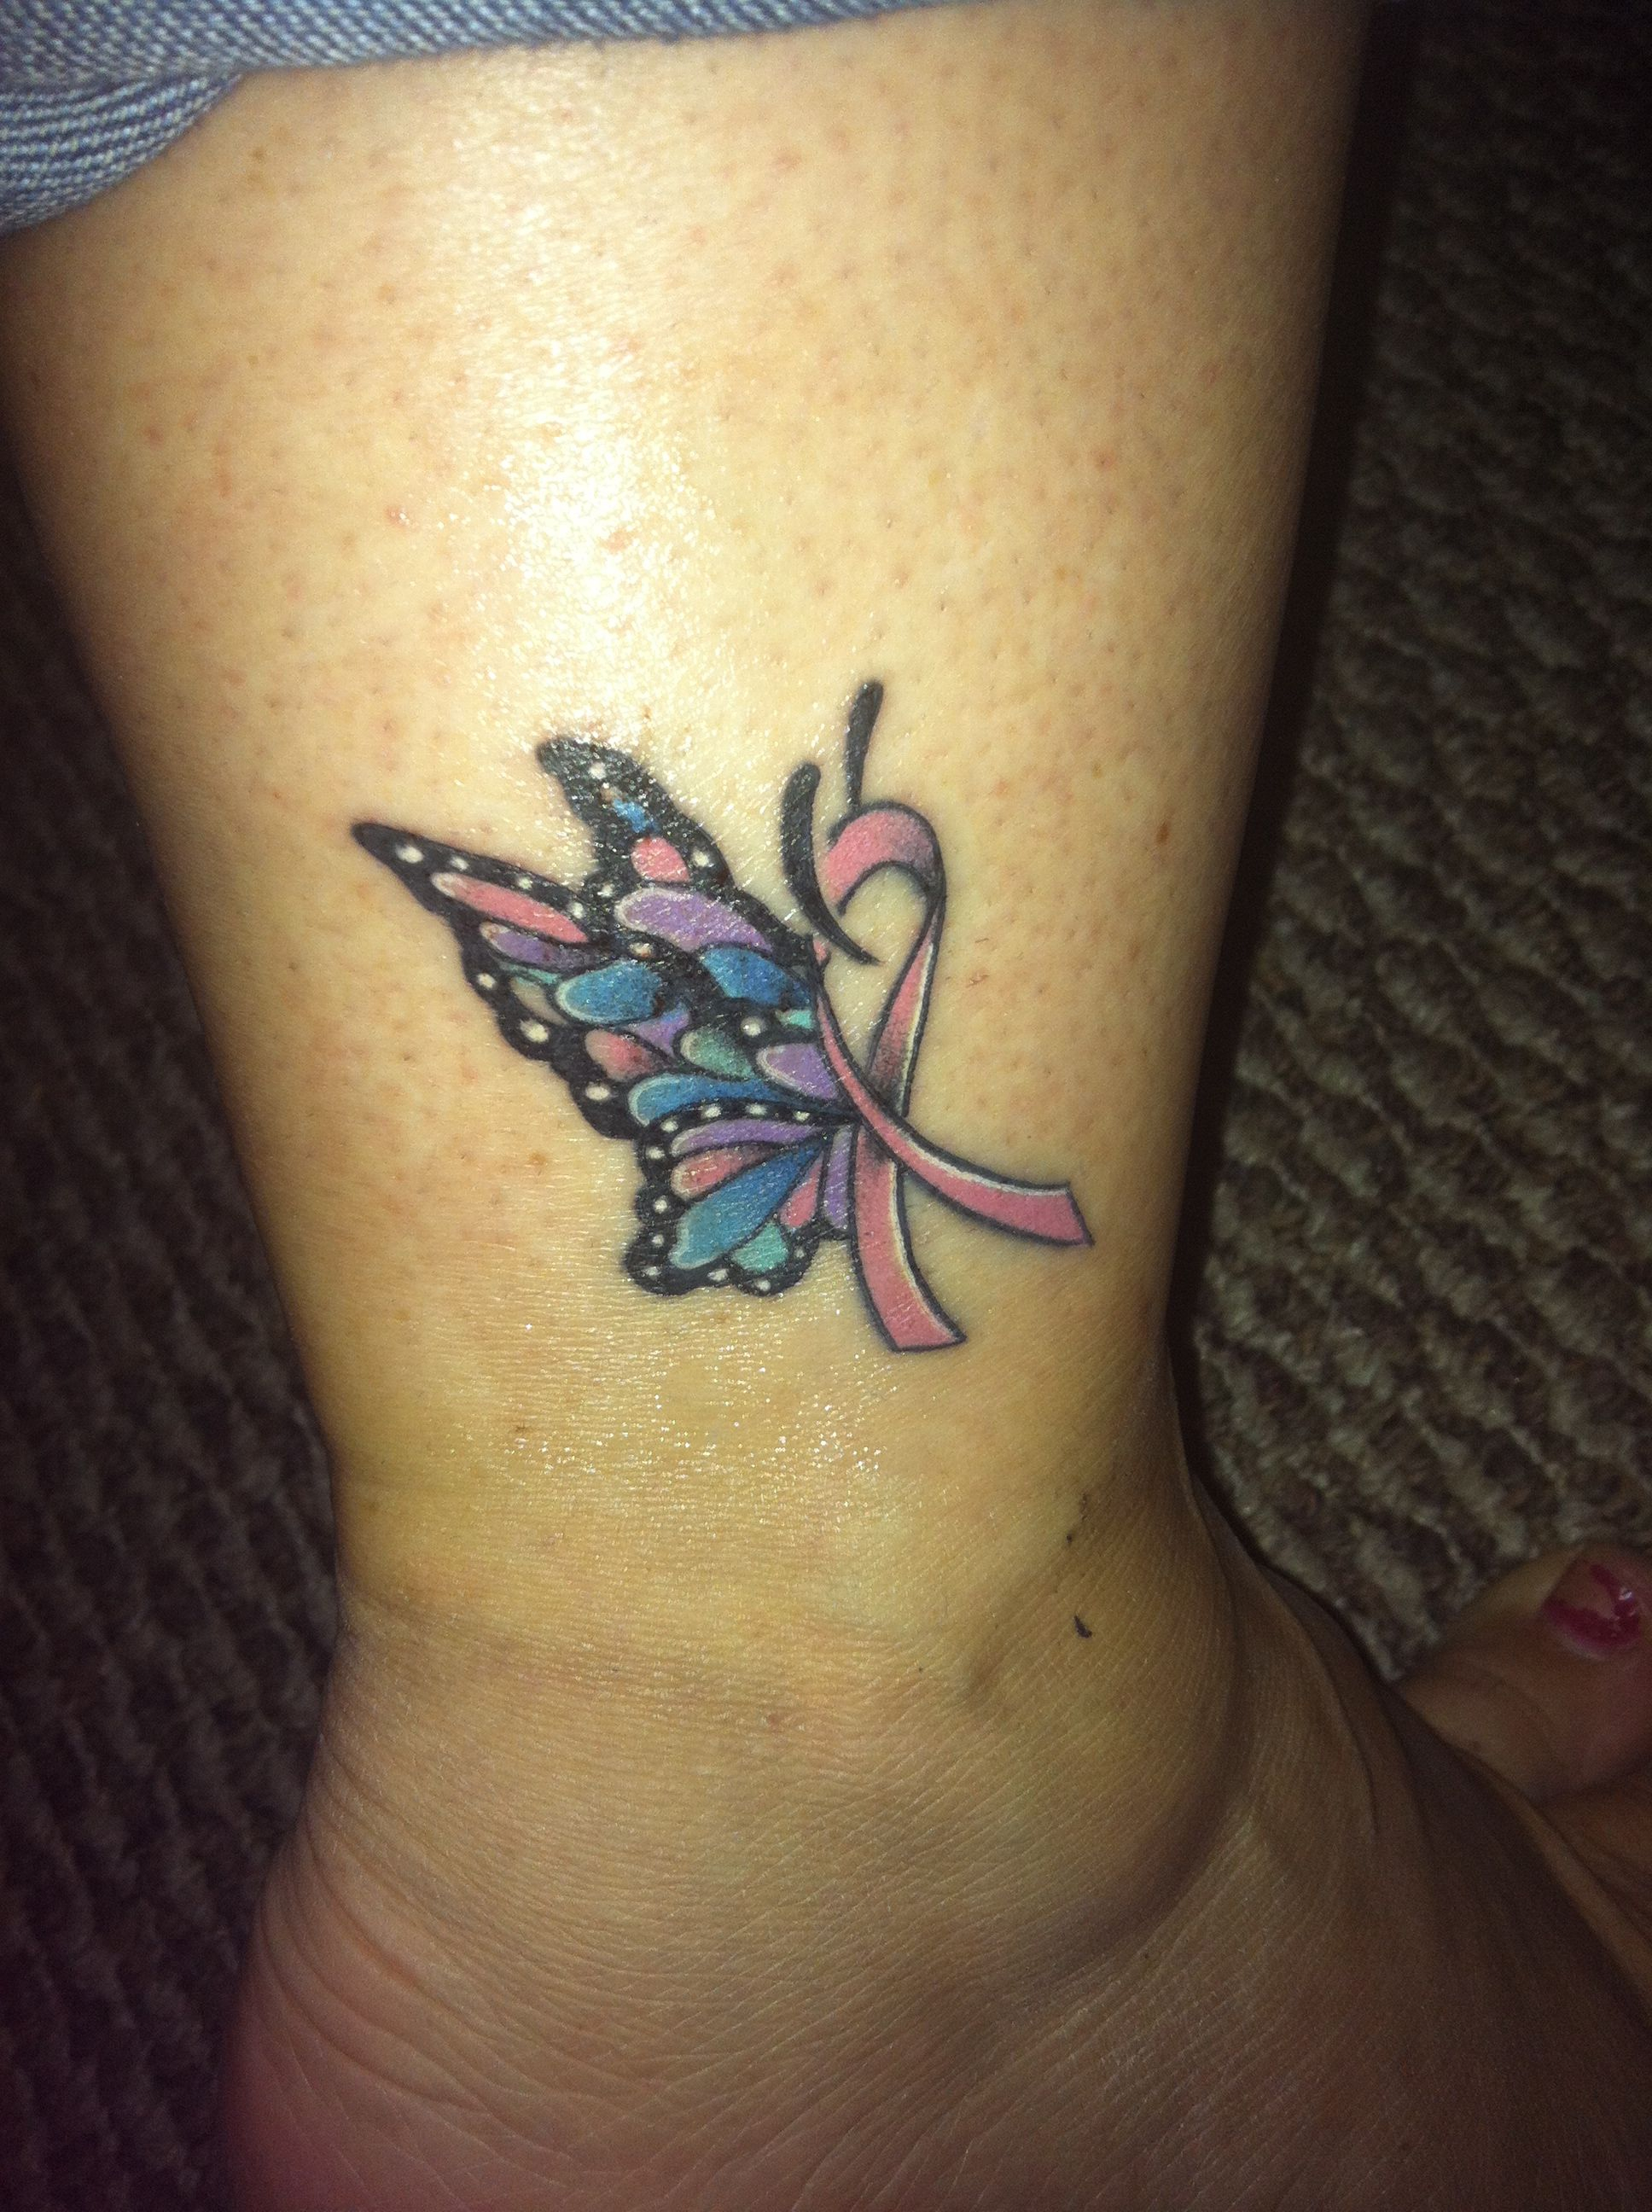 Cancer Ribbon Animal Tattoo Related With Cancer Ribbon Tattoos within dimensions 1936 X 2592